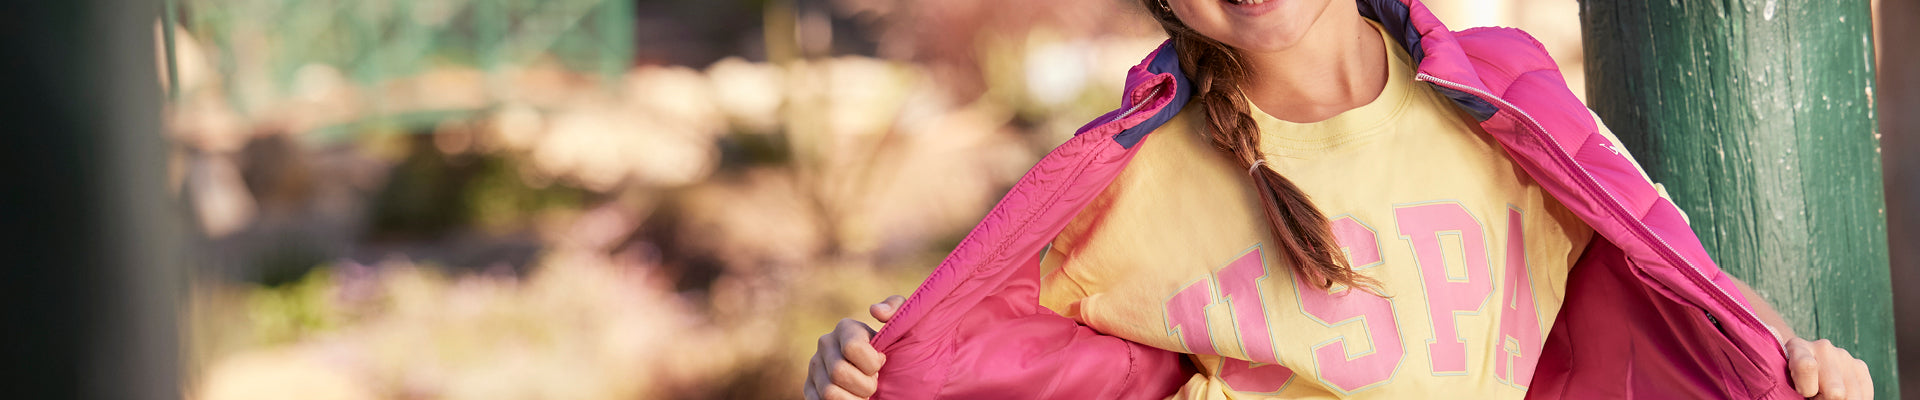 The U.S Polos Assn. Girls Gilet collection includes sleeveless outerwear pieces perfect for layering in all seasons for added warmth and style.